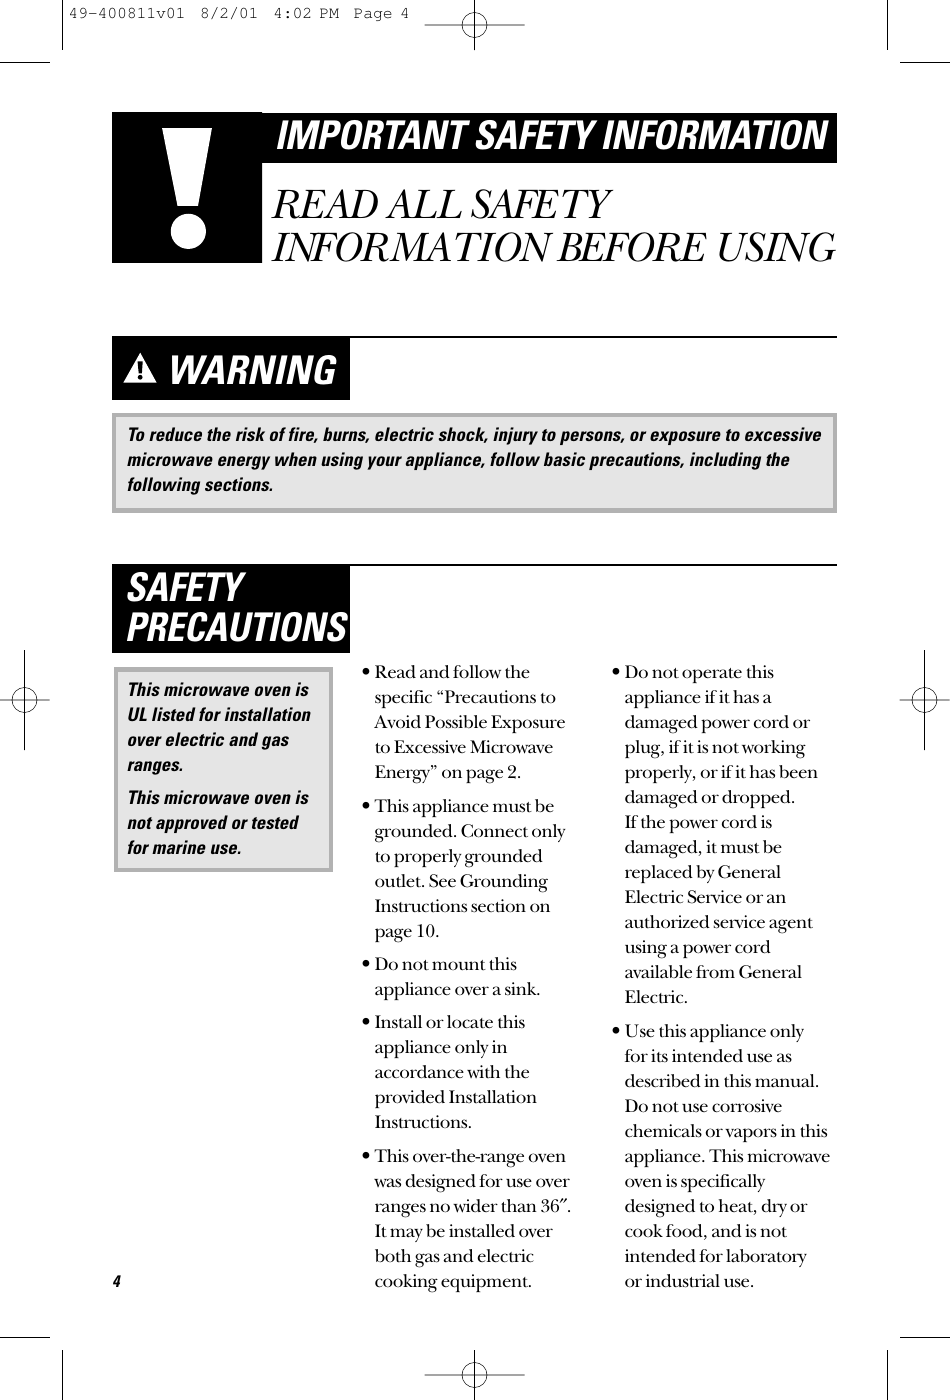 To reduce the risk of fire, burns, electric shock, injury to persons, or exposure to excessivemicrowave energy when using your appliance, follow basic precautions, including thefollowing sections.WARNING•Read and follow thespecific “Precautions toAvoid Possible Exposure to Excessive MicrowaveEnergy” on page 2.•This appliance must begrounded. Connect only to properly groundedoutlet. See GroundingInstructions section onpage 10.•Do not mount thisappliance over a sink. •Install or locate thisappliance only inaccordance with theprovided InstallationInstructions.•This over-the-range ovenwas designed for use overranges no wider than 36″.It may be installed overboth gas and electriccooking equipment.•Do not operate thisappliance if it has adamaged power cord orplug, if it is not workingproperly, or if it has beendamaged or dropped. If the power cord isdamaged, it must bereplaced by GeneralElectric Service or anauthorized service agentusing a power cordavailable from GeneralElectric.•Use this appliance only for its intended use asdescribed in this manual.Do not use corrosivechemicals or vapors in thisappliance. This microwaveoven is specificallydesigned to heat, dry orcook food, and is notintended for laboratory or industrial use.This microwave oven isUL listed for installationover electric and gasranges.This microwave oven isnot approved or testedfor marine use.SAFETYPRECAUTIONS4IMPORTANT SAFETY INFORMATIONREAD ALL SAFETYINFORMATION BEFORE USING49-400811v01  8/2/01  4:02 PM  Page 4